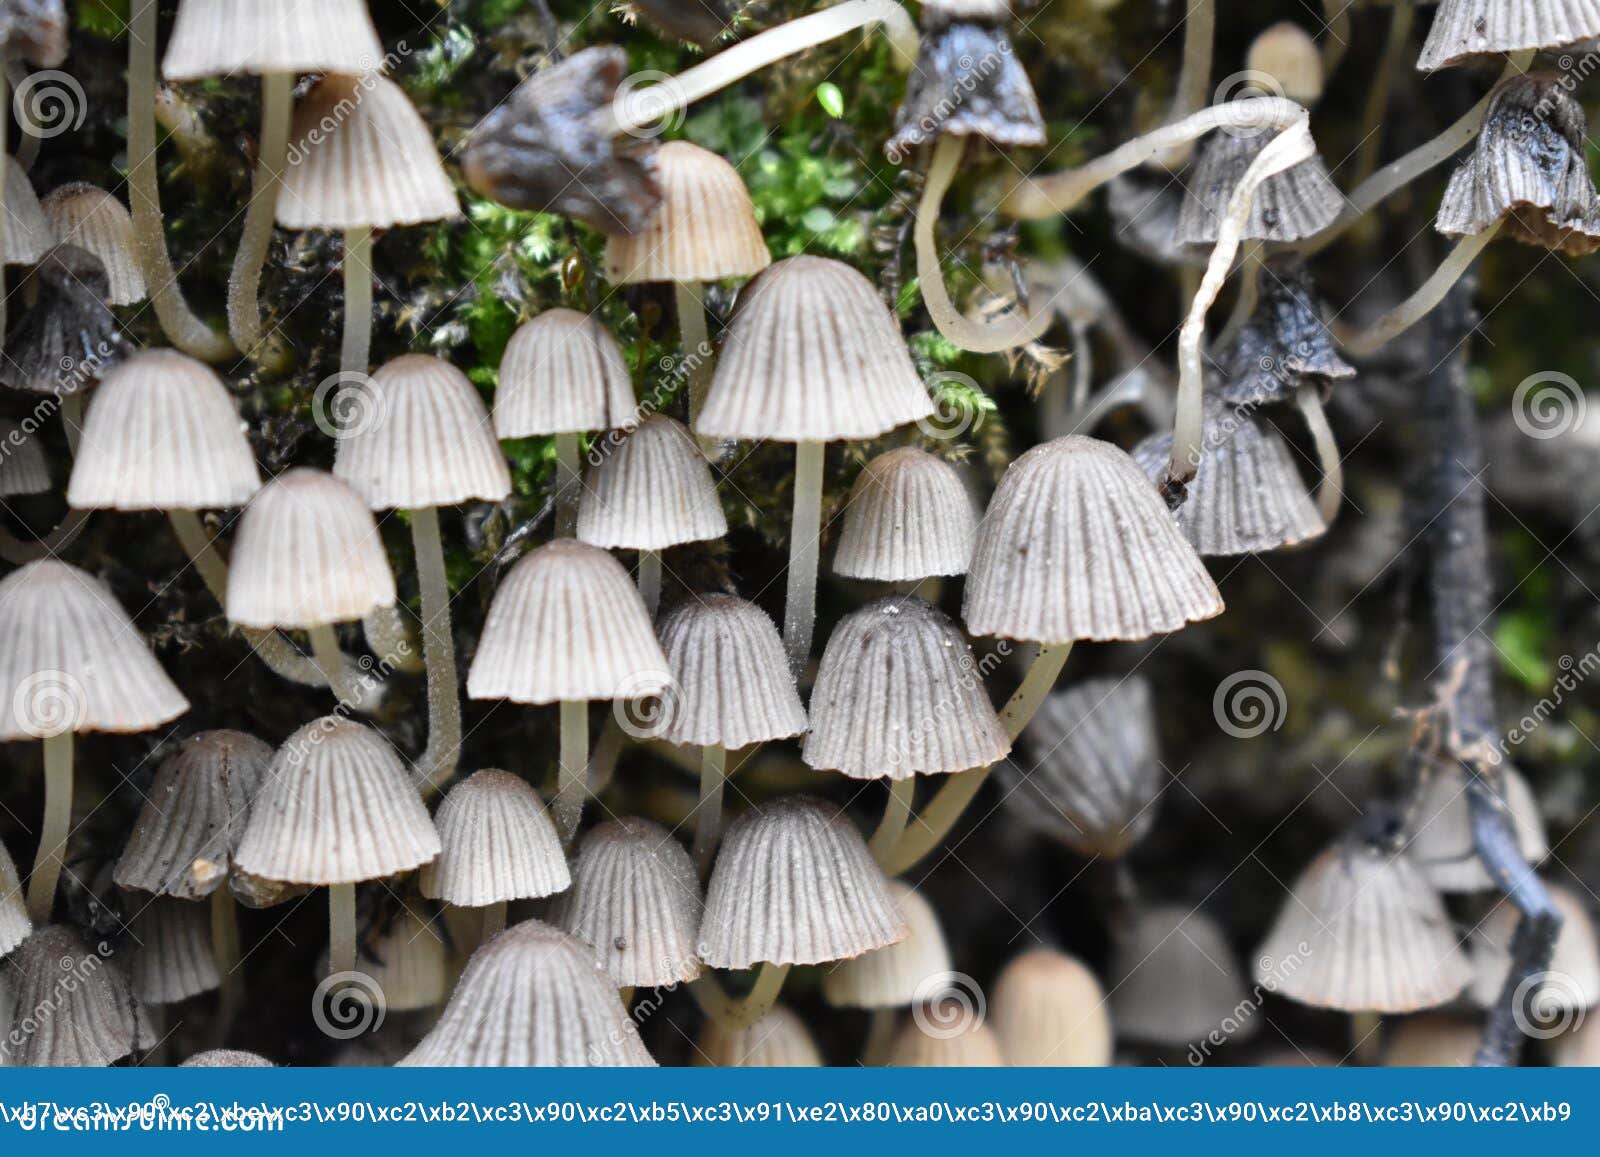 mushrooms-a mysterious and still unexplored species of living organisms